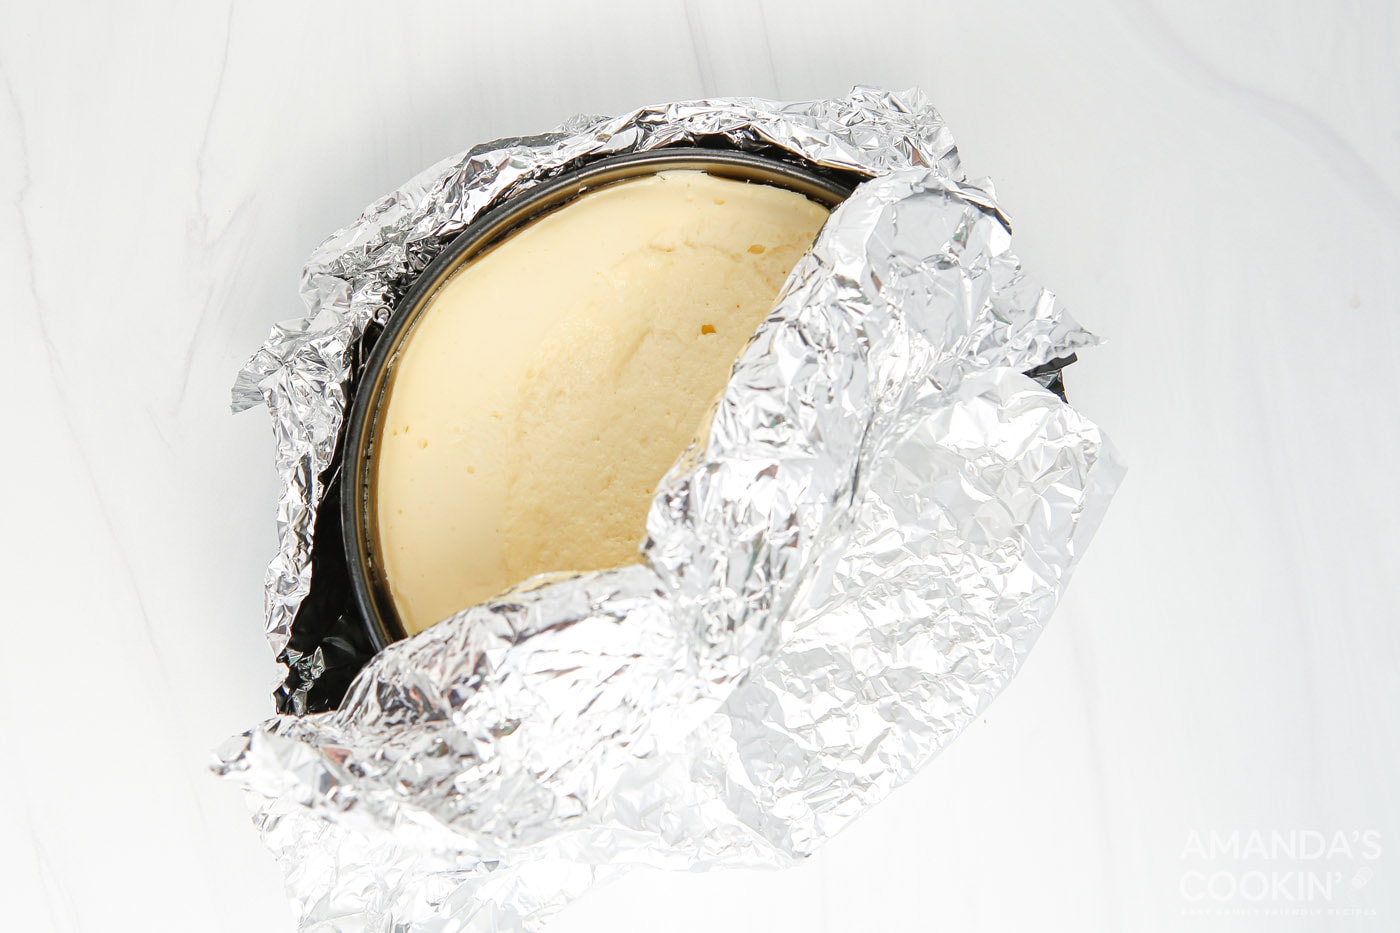 cheesecake wrapped in aluminum foil